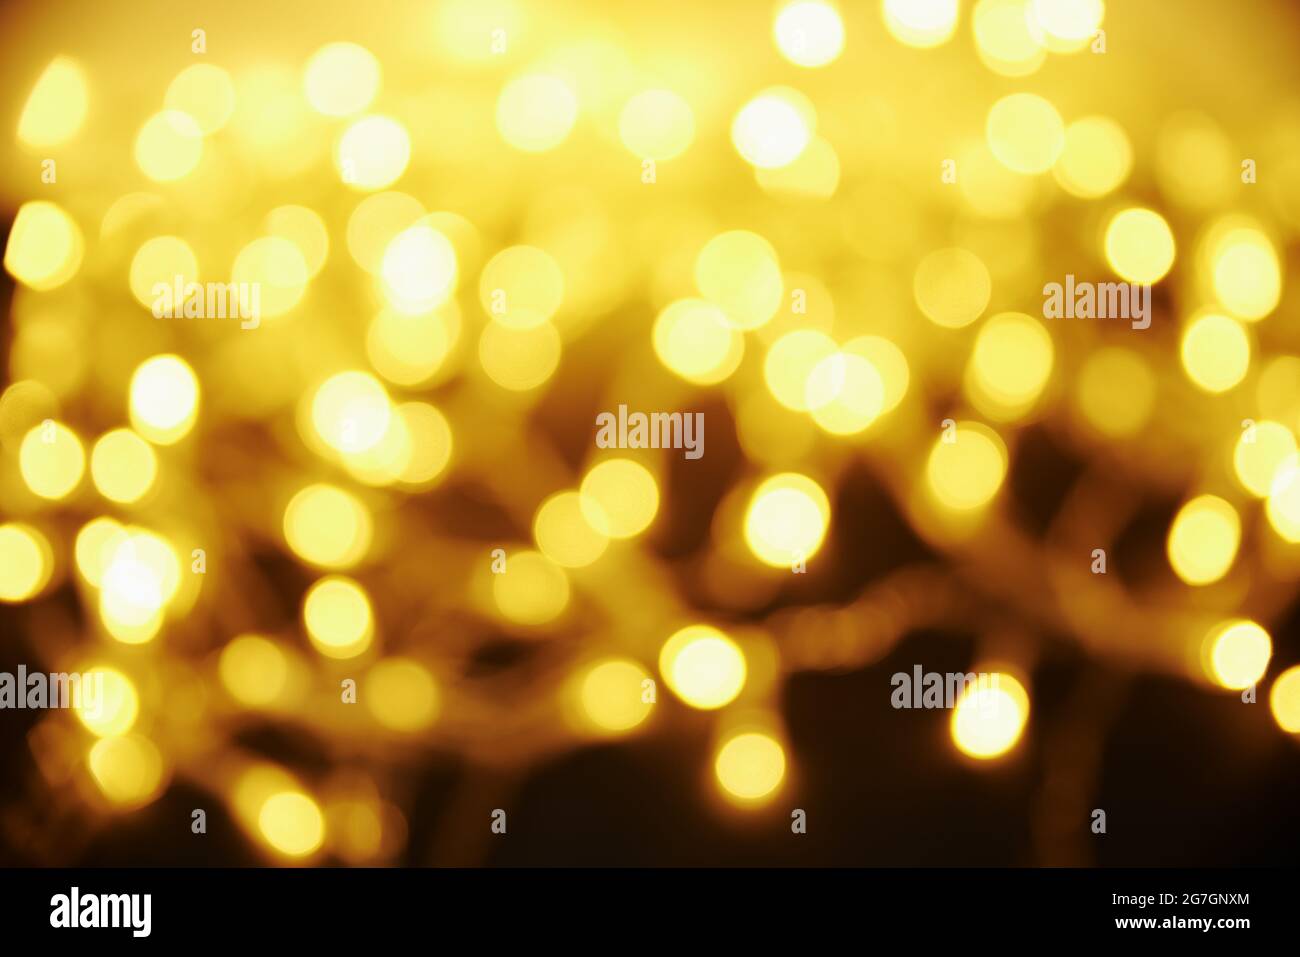 Golden colored blurred background. Abstract background with bokeh. Stock Photo